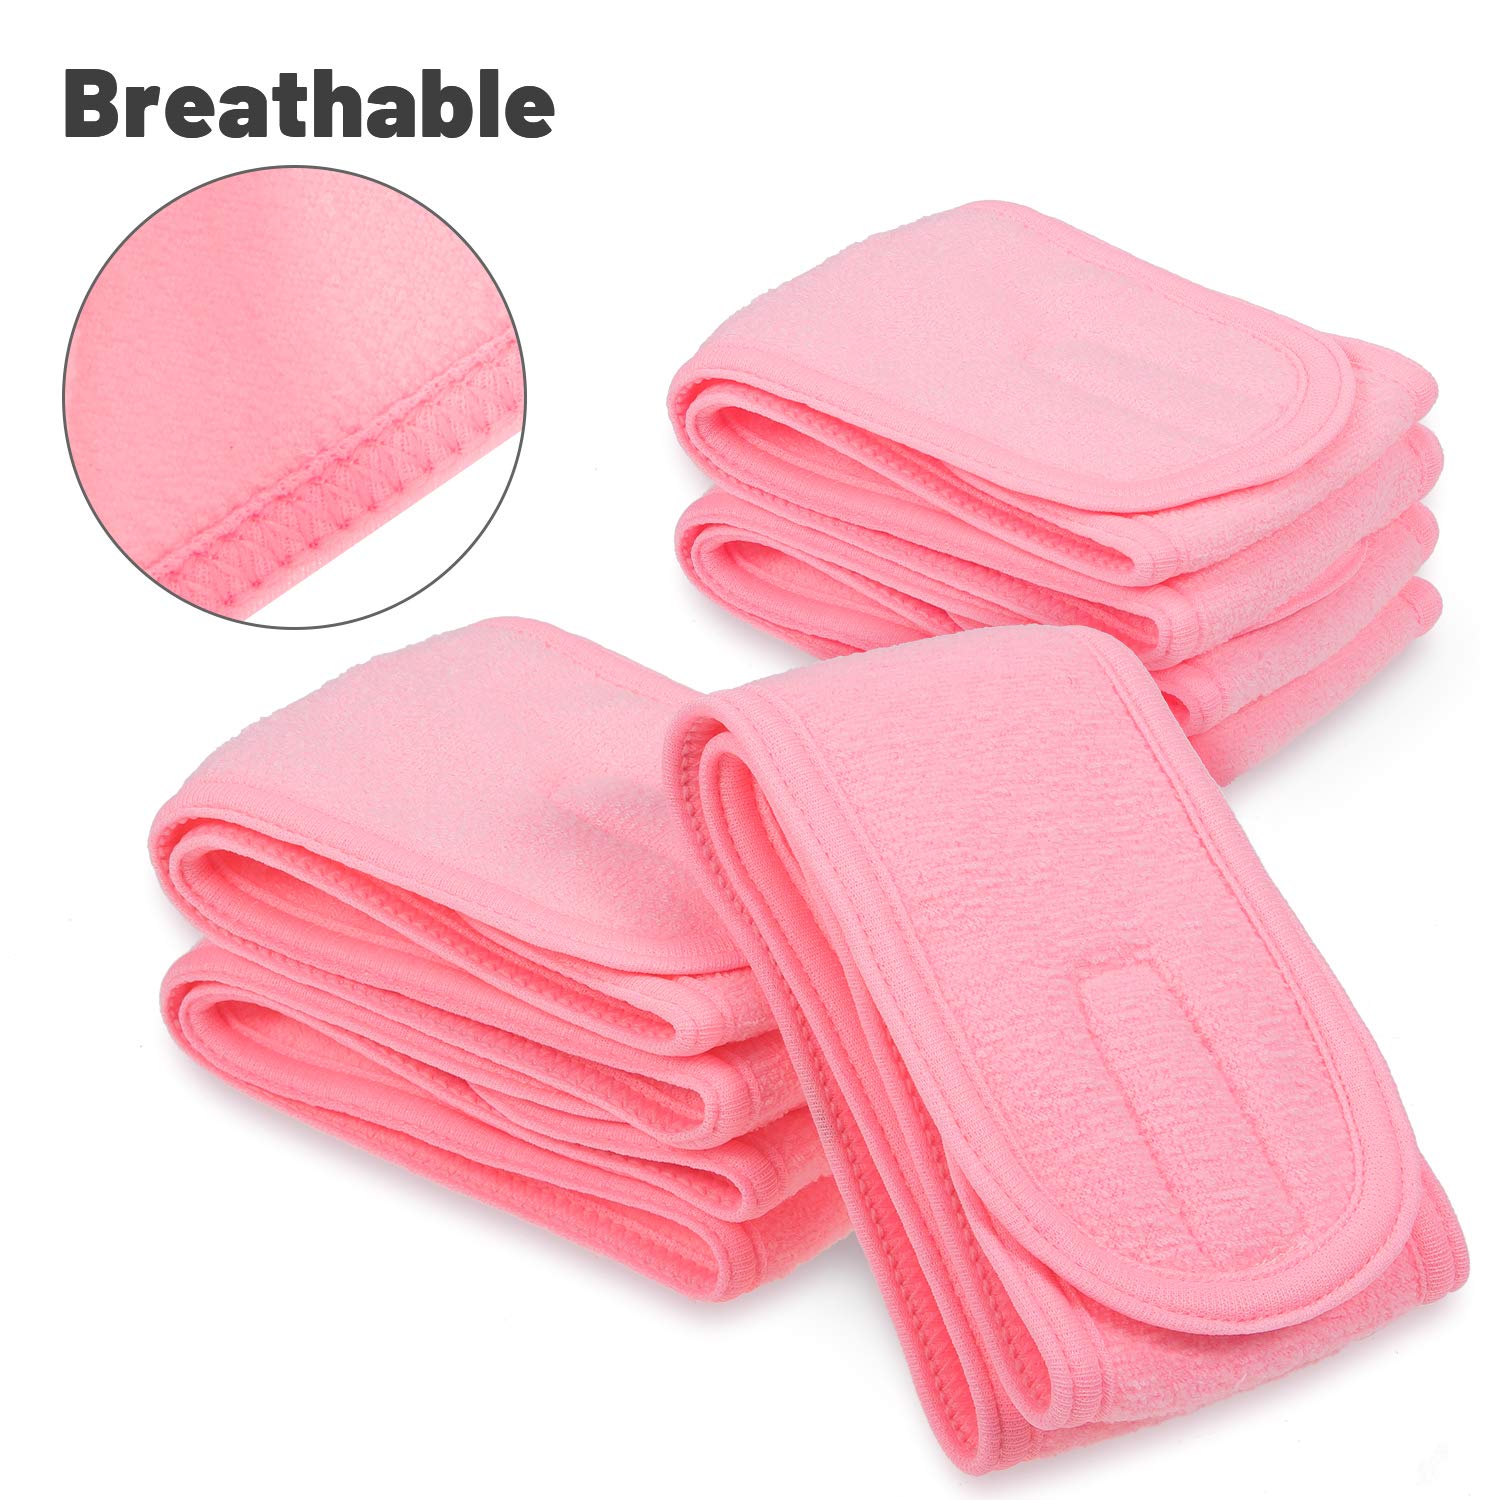 Breathable Material Adjustable Stretchy Face-Wash Spa Make-Up Headband And Mask Brush